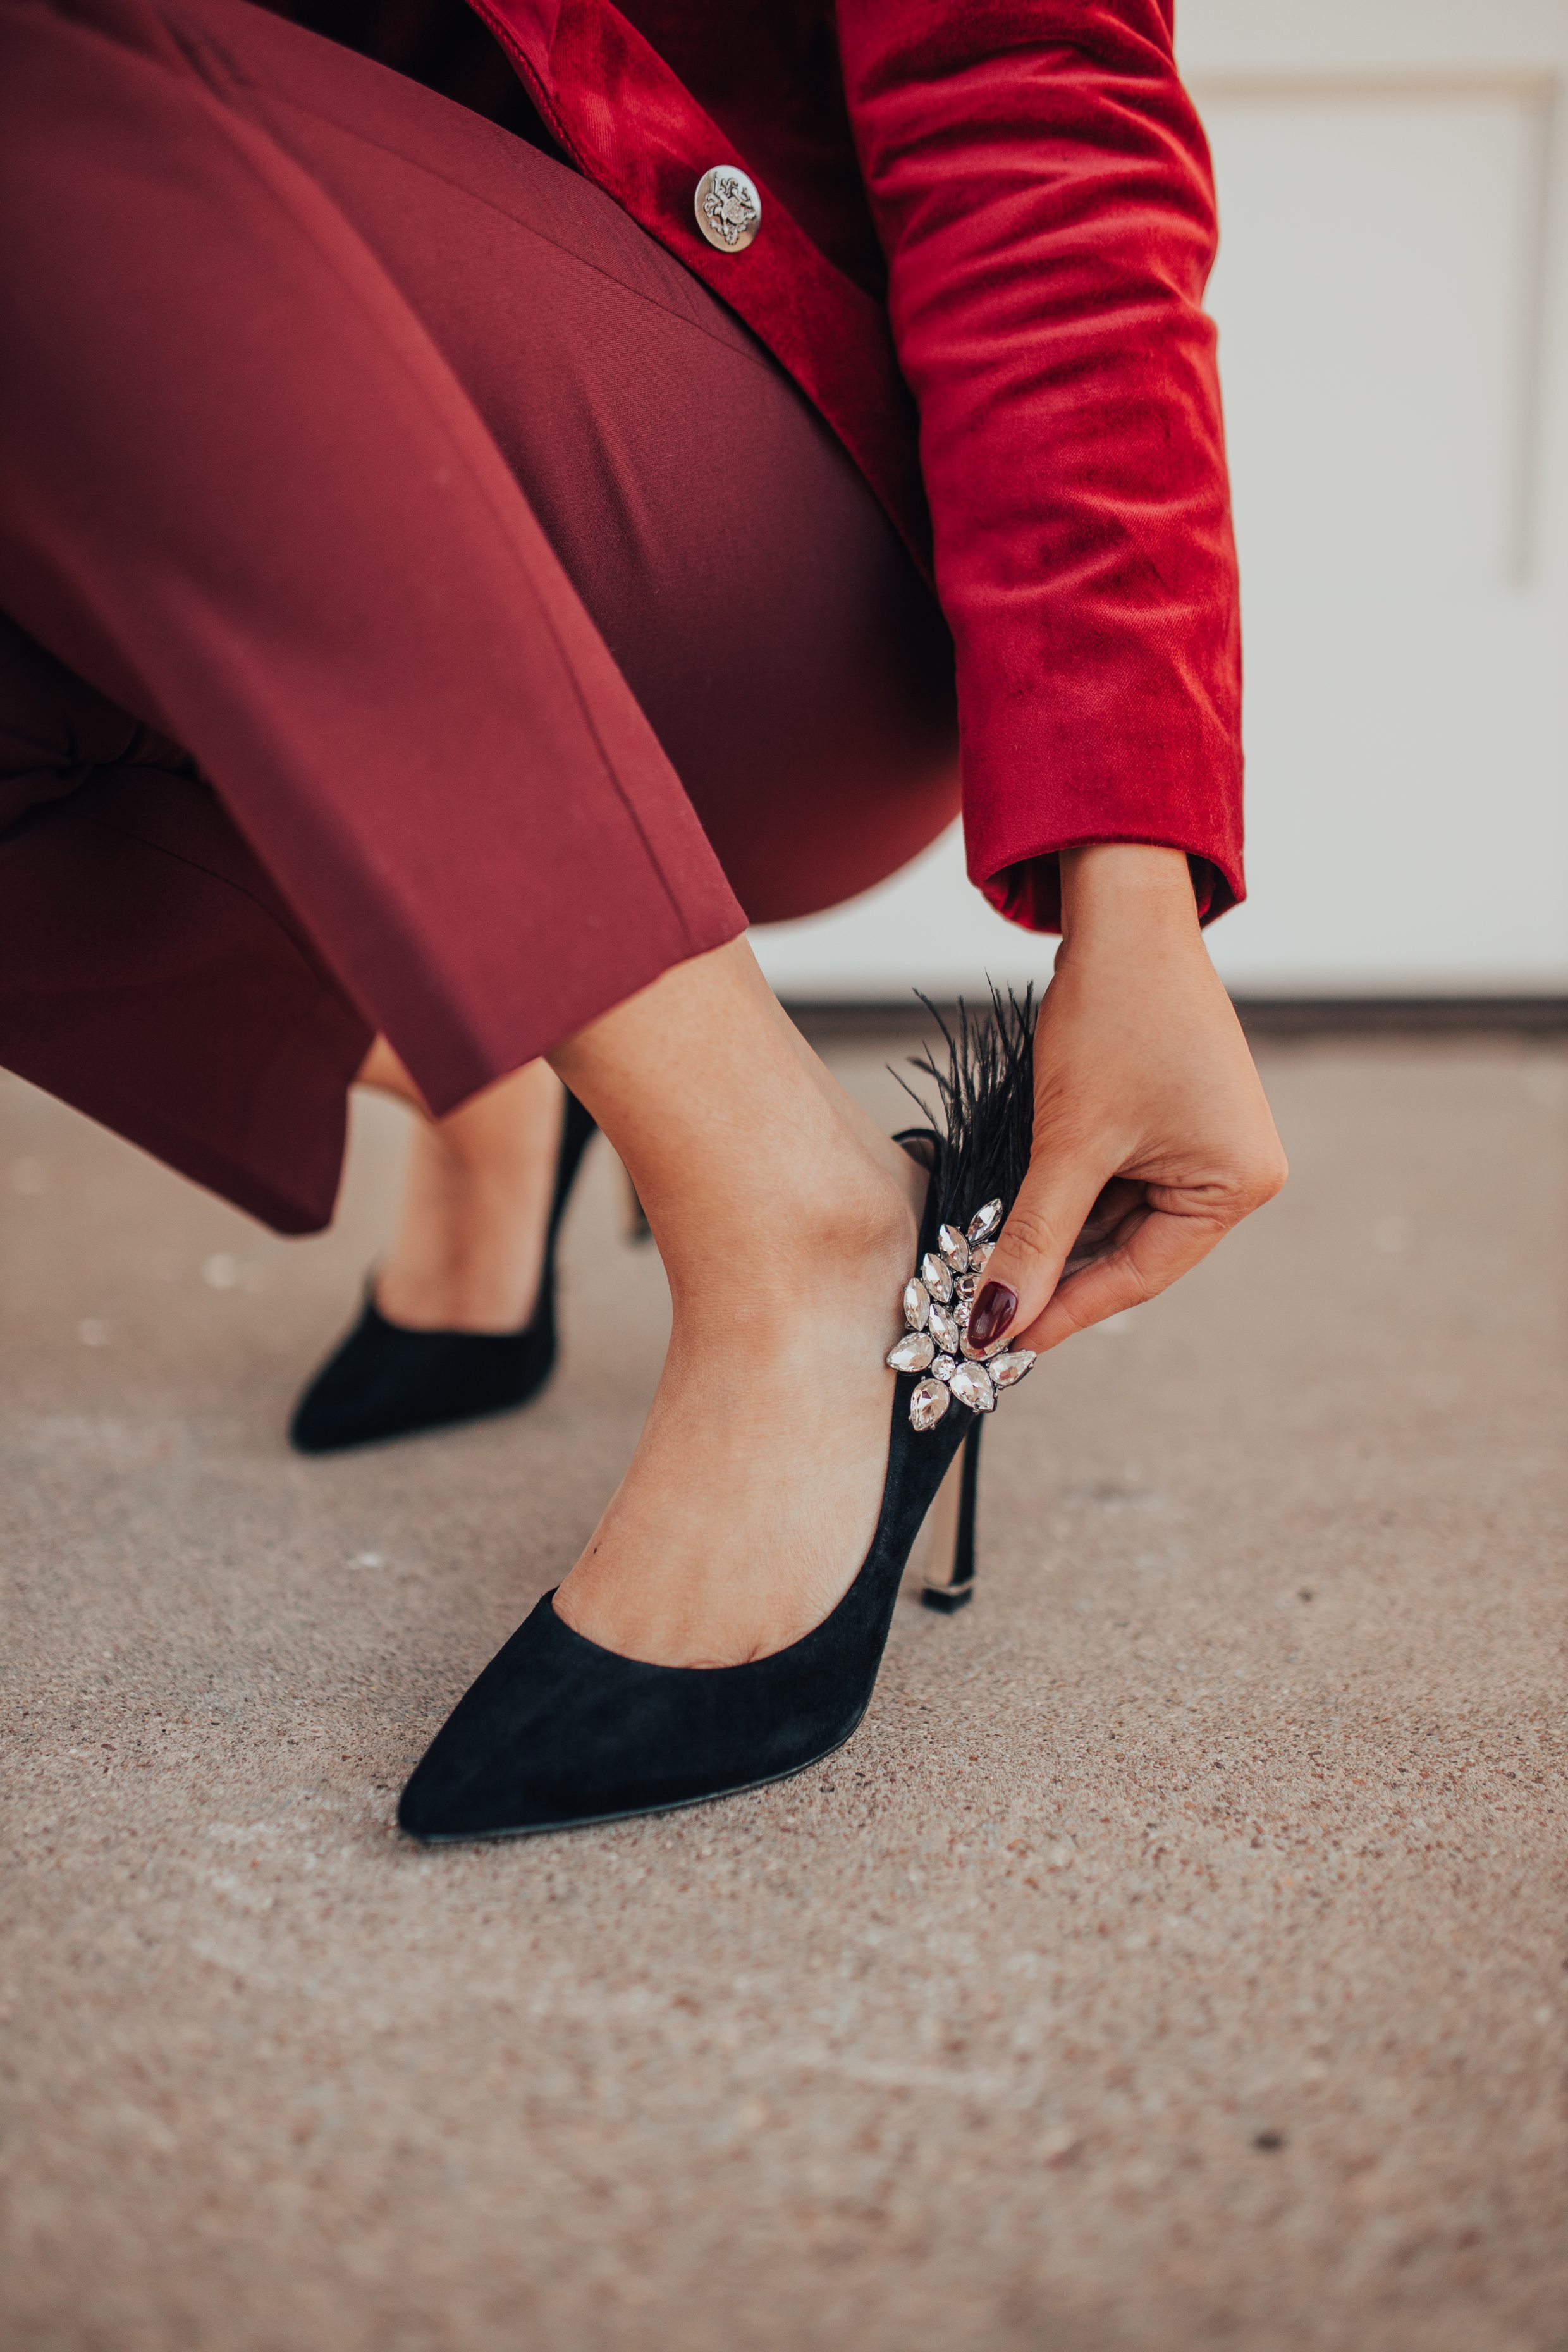 Shoe clips to change up the look of classic pumps